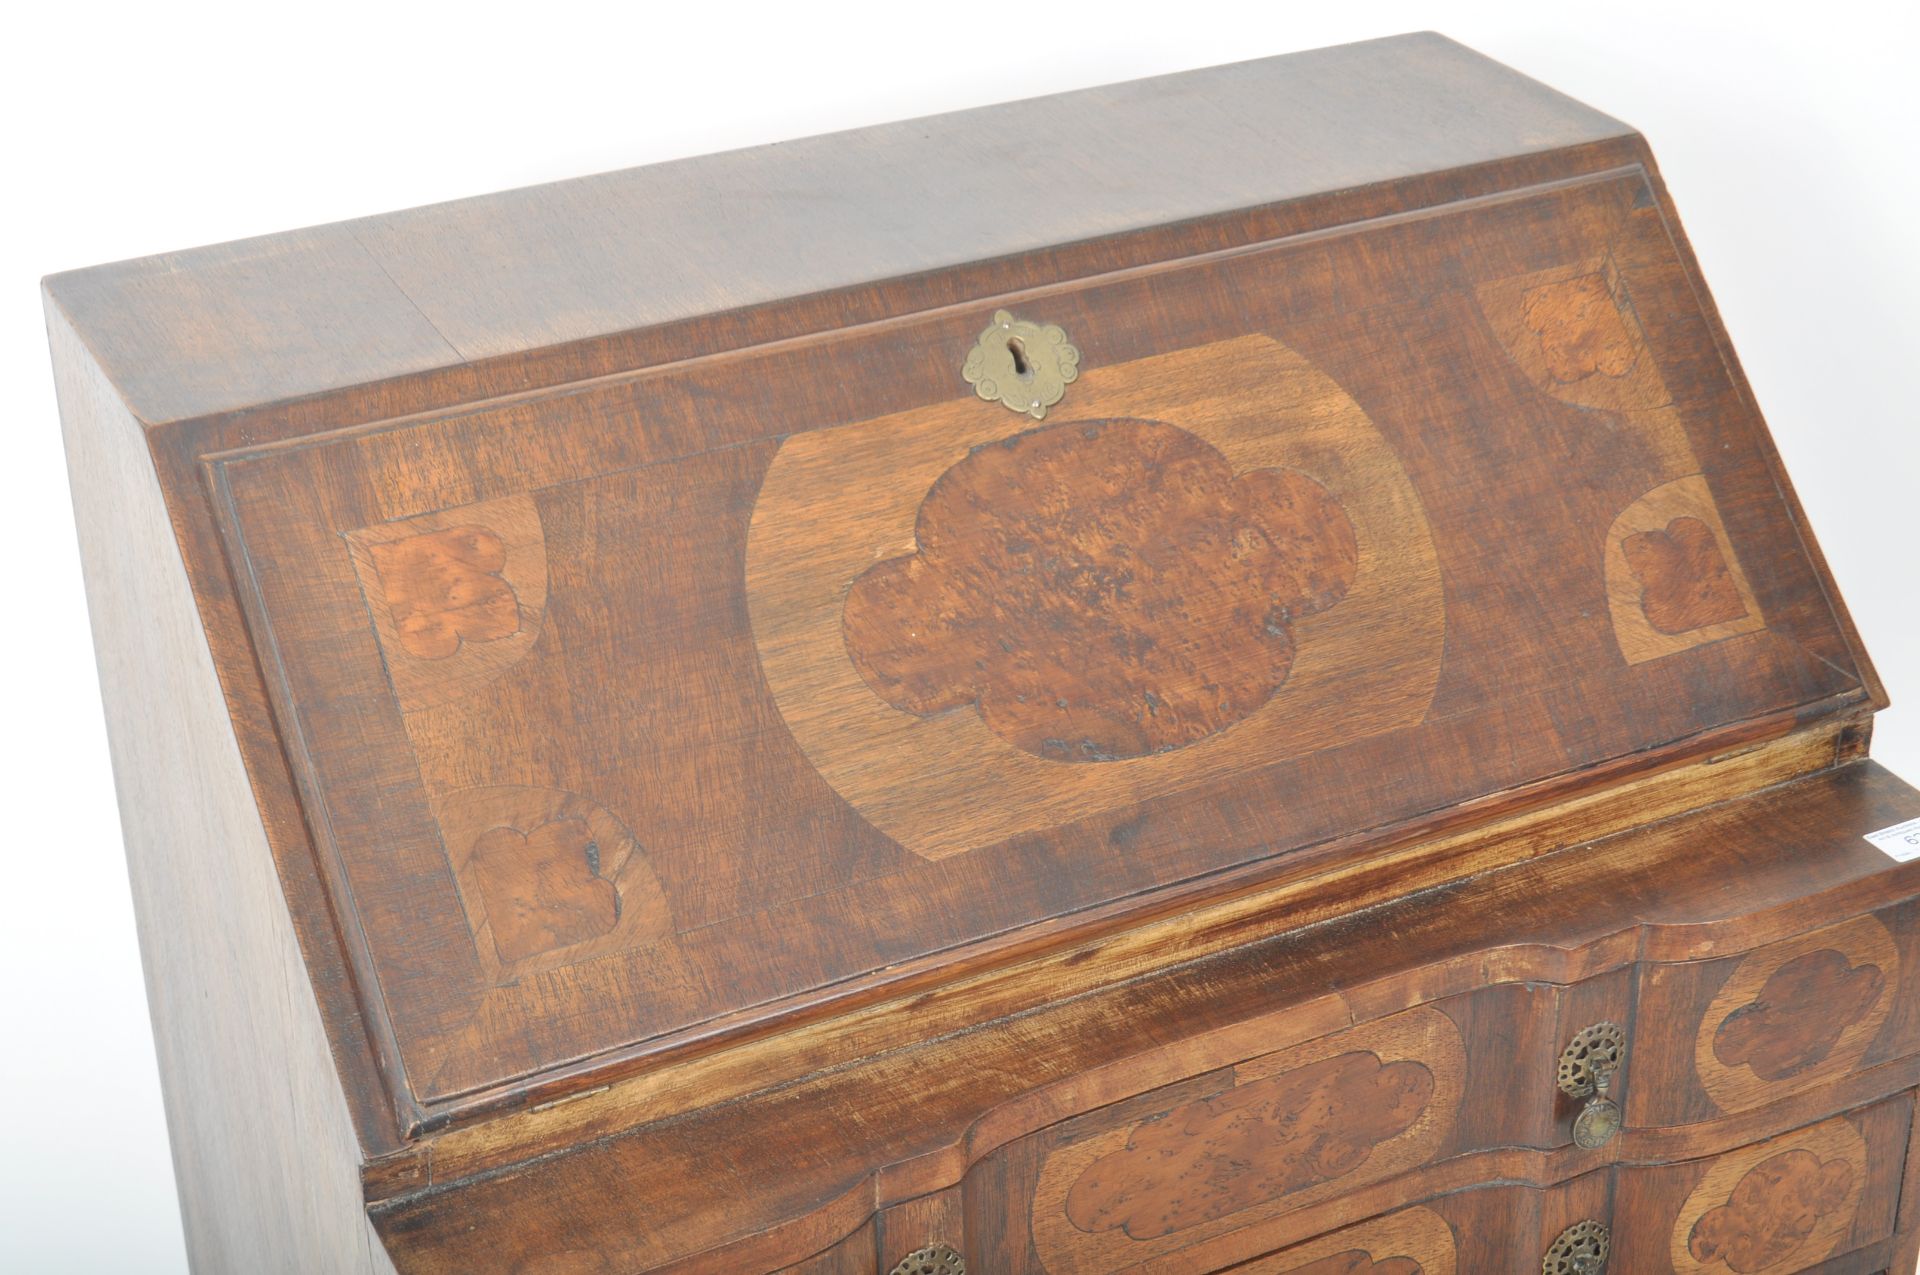 EARLY 20TH CENTURY QUEEN ANNE STYLE WALNUT BUREAU - Image 3 of 7